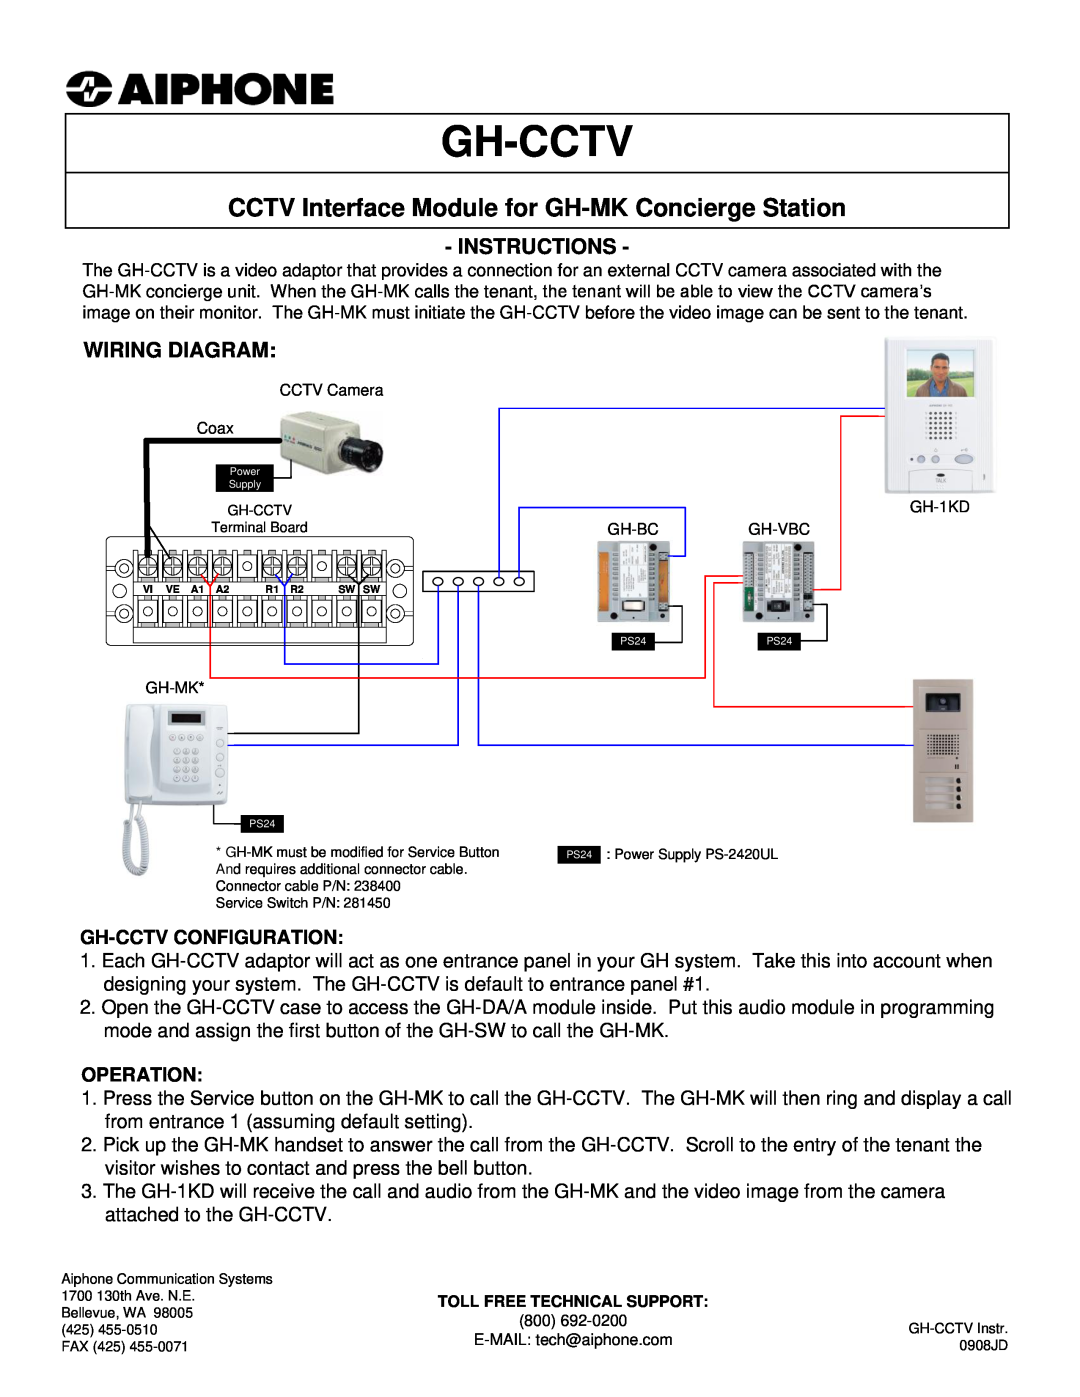 Aiphone GH-CCTV manual Gh-Cctv, CCTV Interface Module for GH-MK Concierge Station, Instructions, Wiring Diagram, Operation 